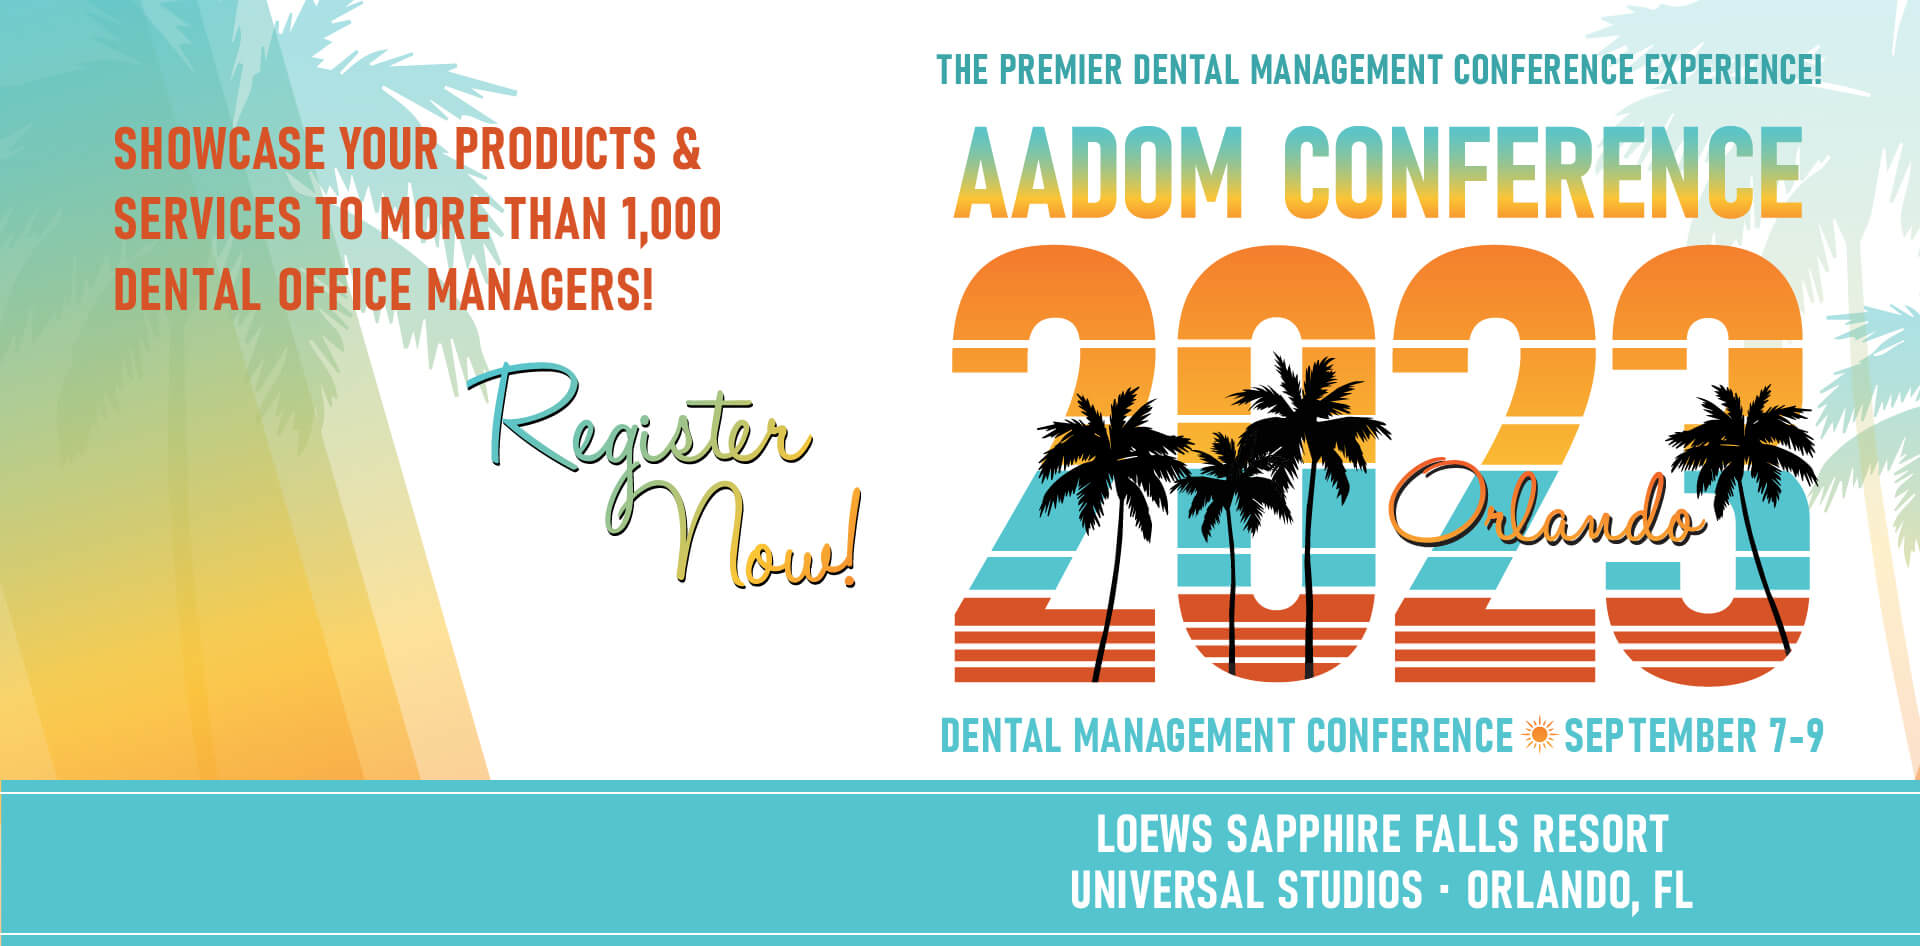 The cover of the AADOM 2023 conference